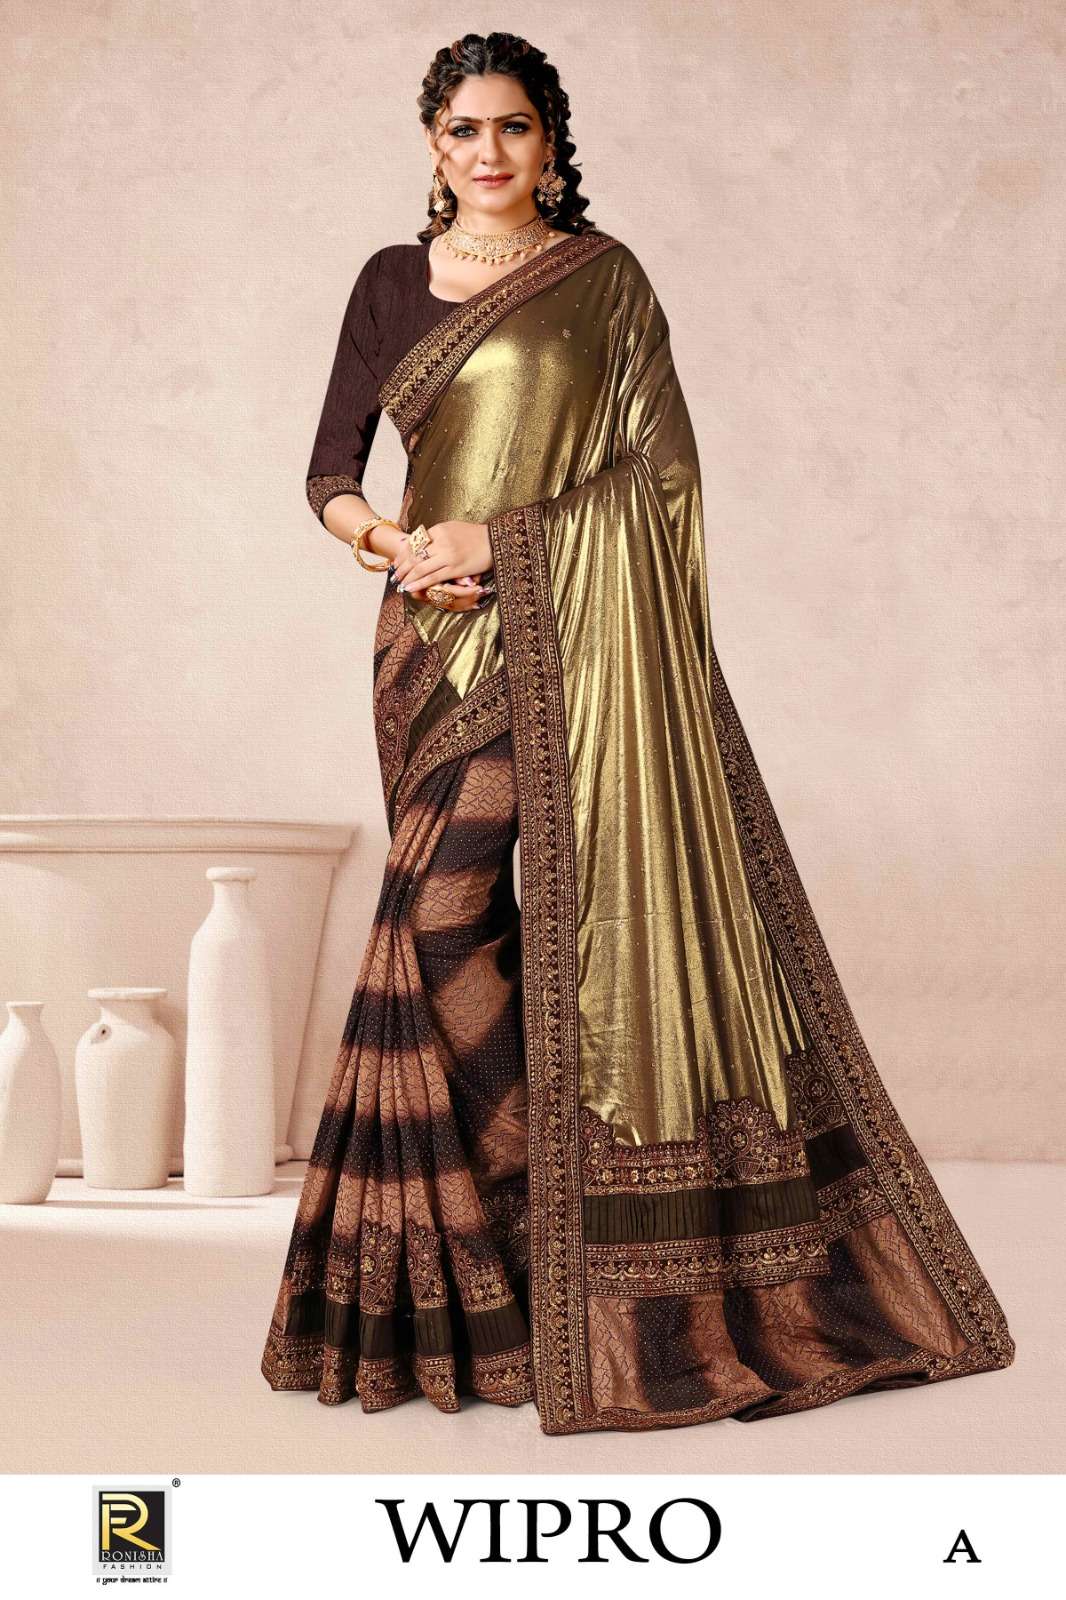 Ranjna by Wipro fabric imported lycra  fancy stone worked  fancy designer exclusive saree collection